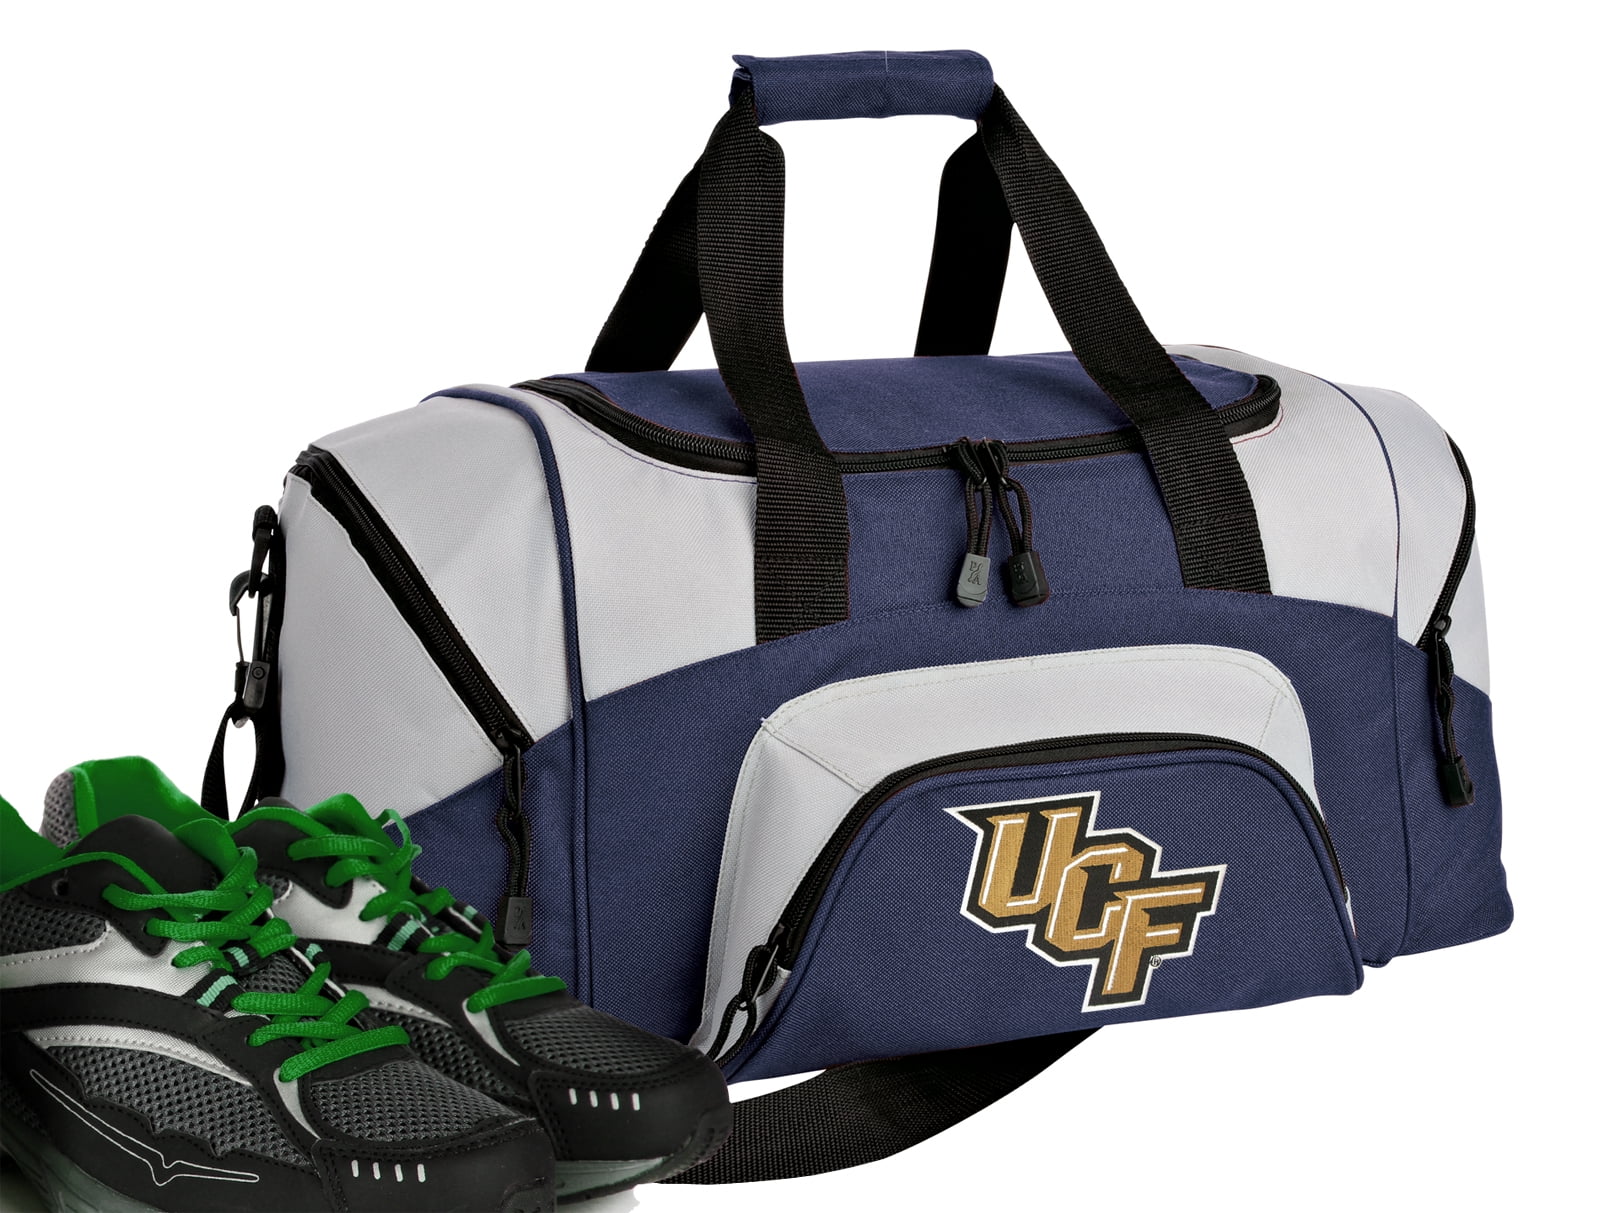 Broad Bay Small UCF Duffel Bag University of Central Florida Gym Bags or Suitcase 